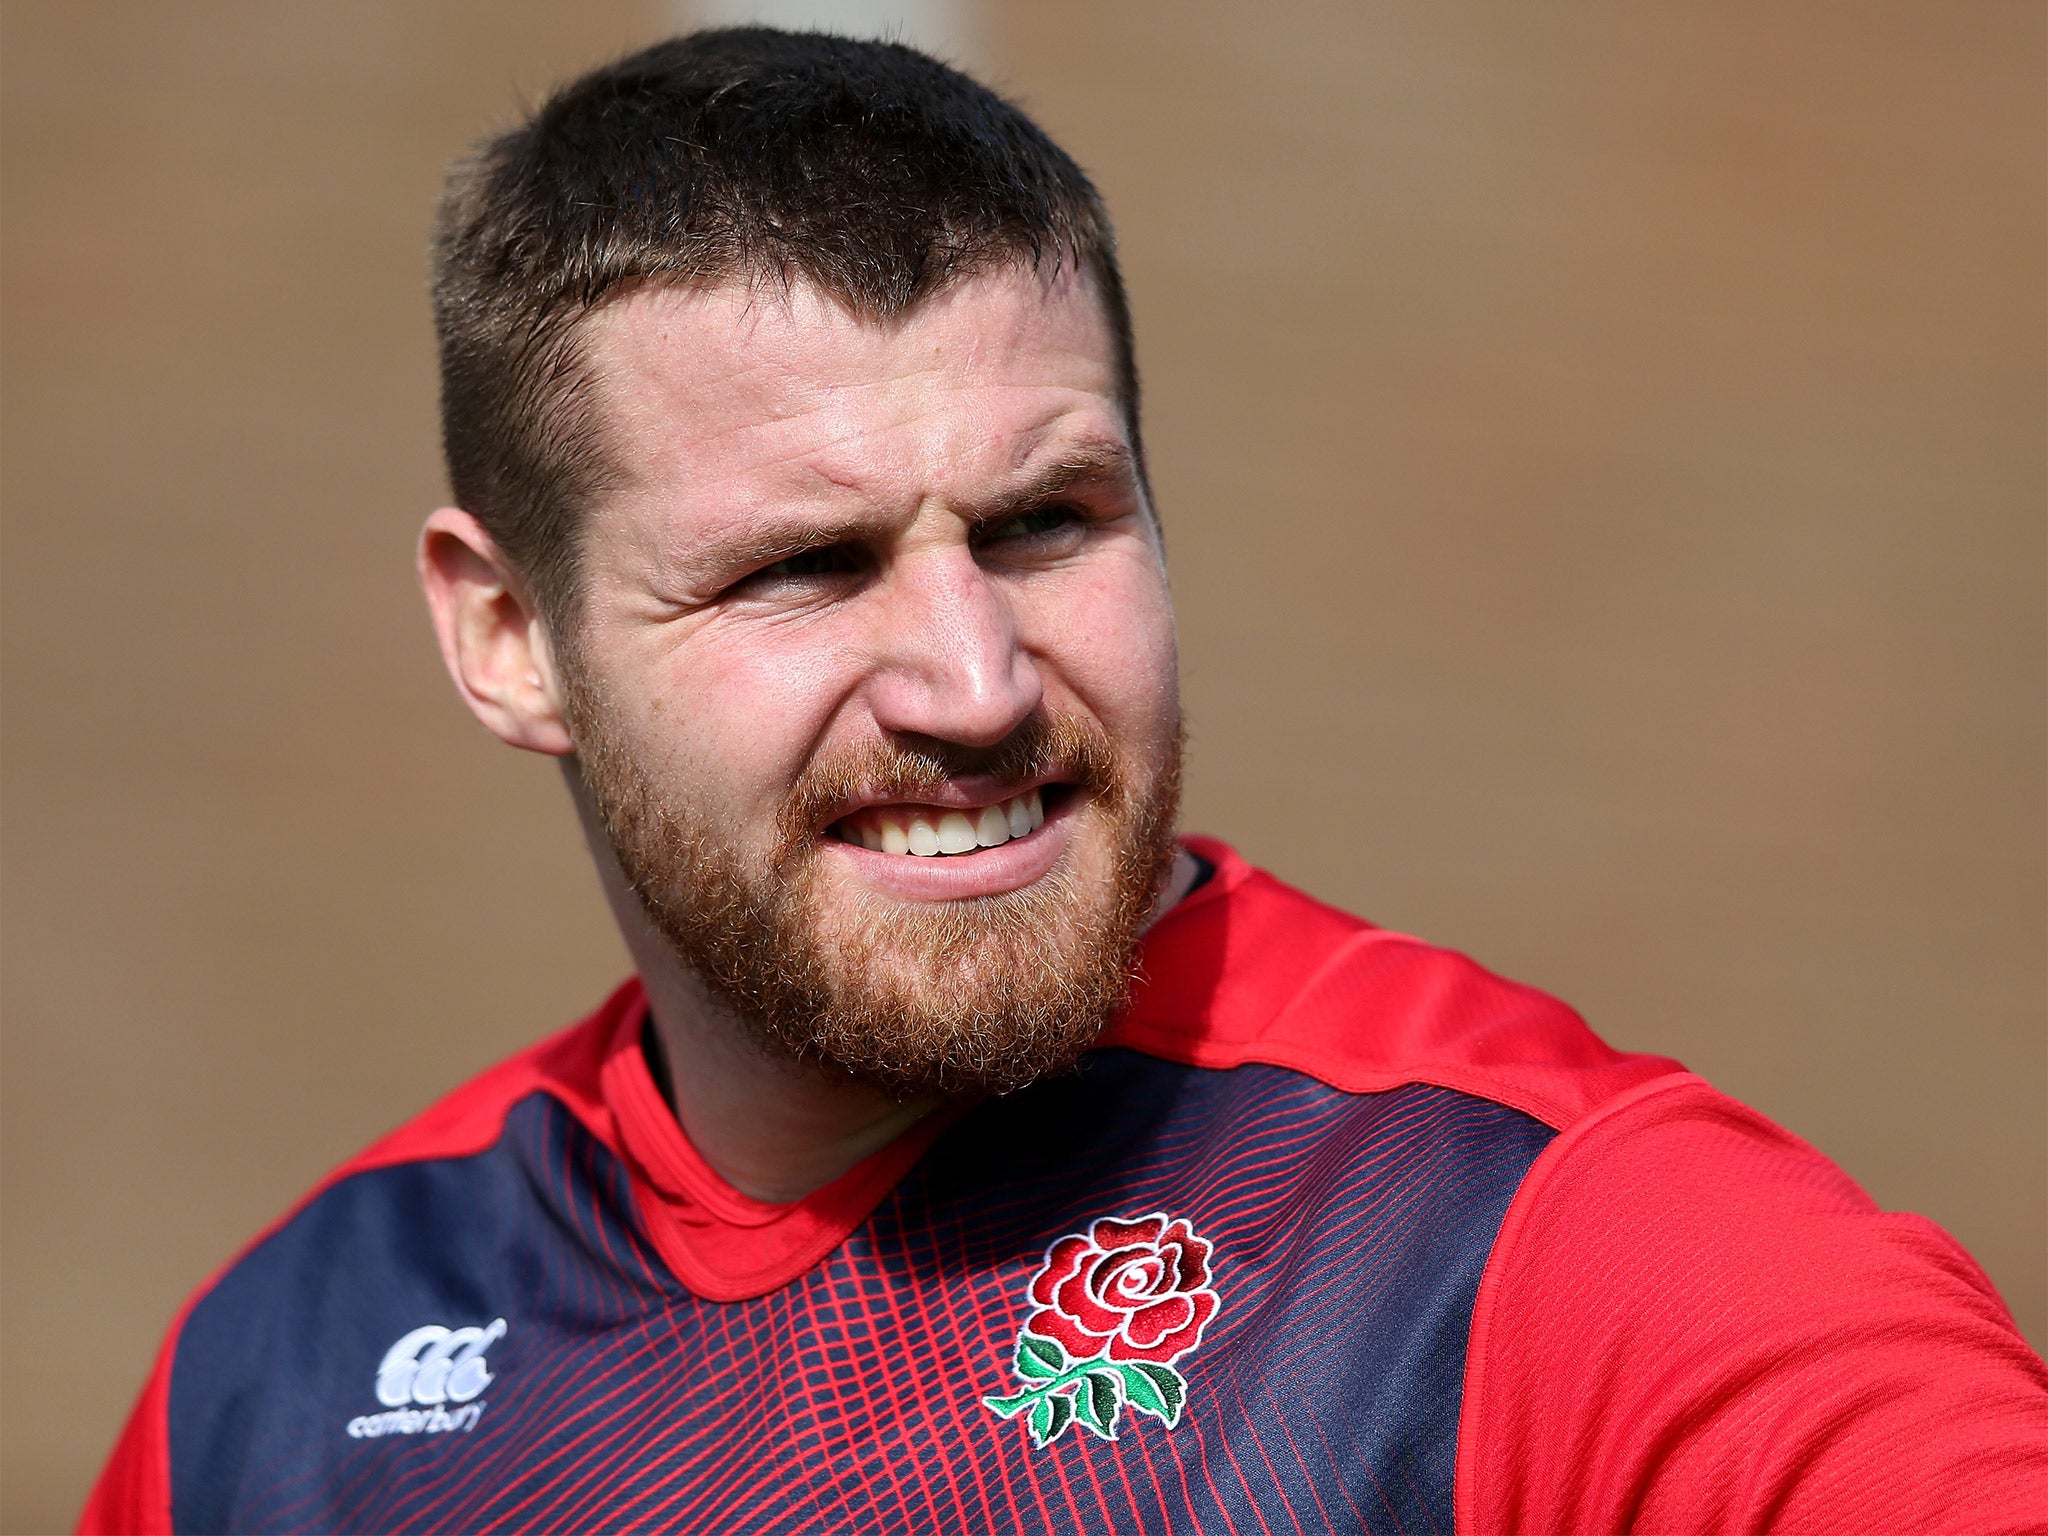 Ben Morgan played a key role in England’s 26-17 victory over Australia last November